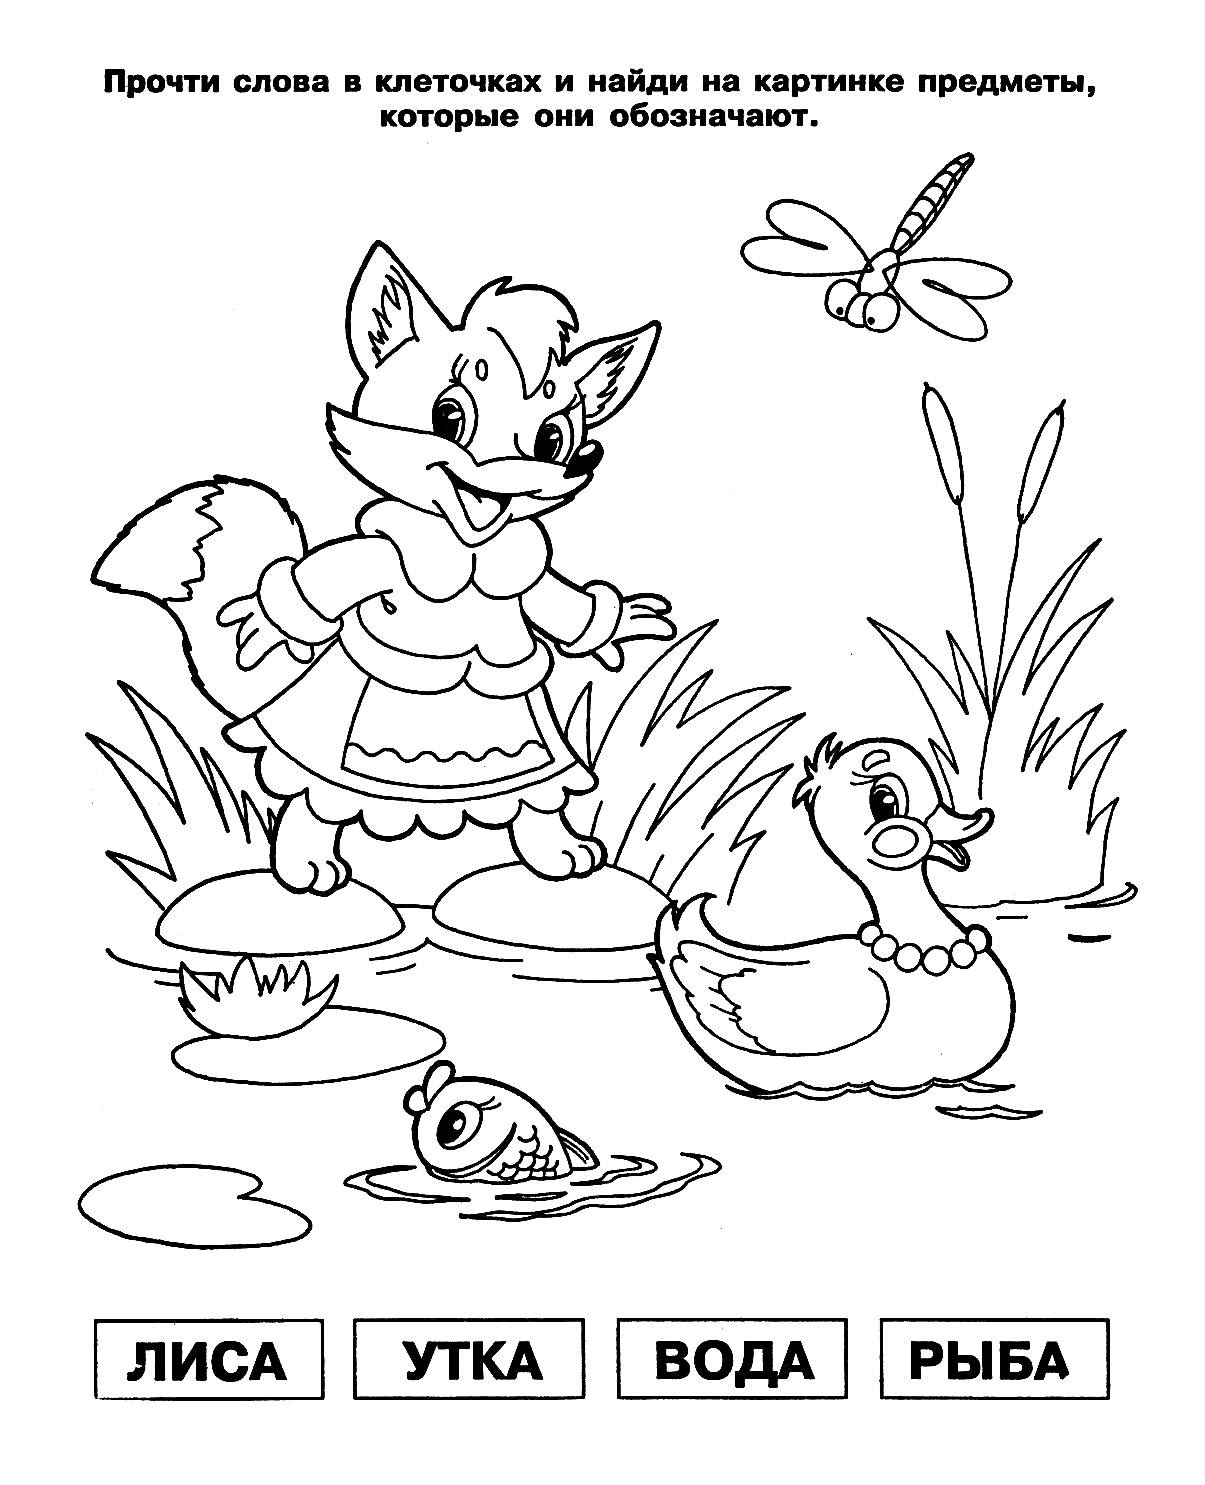 Coloring book puzzles